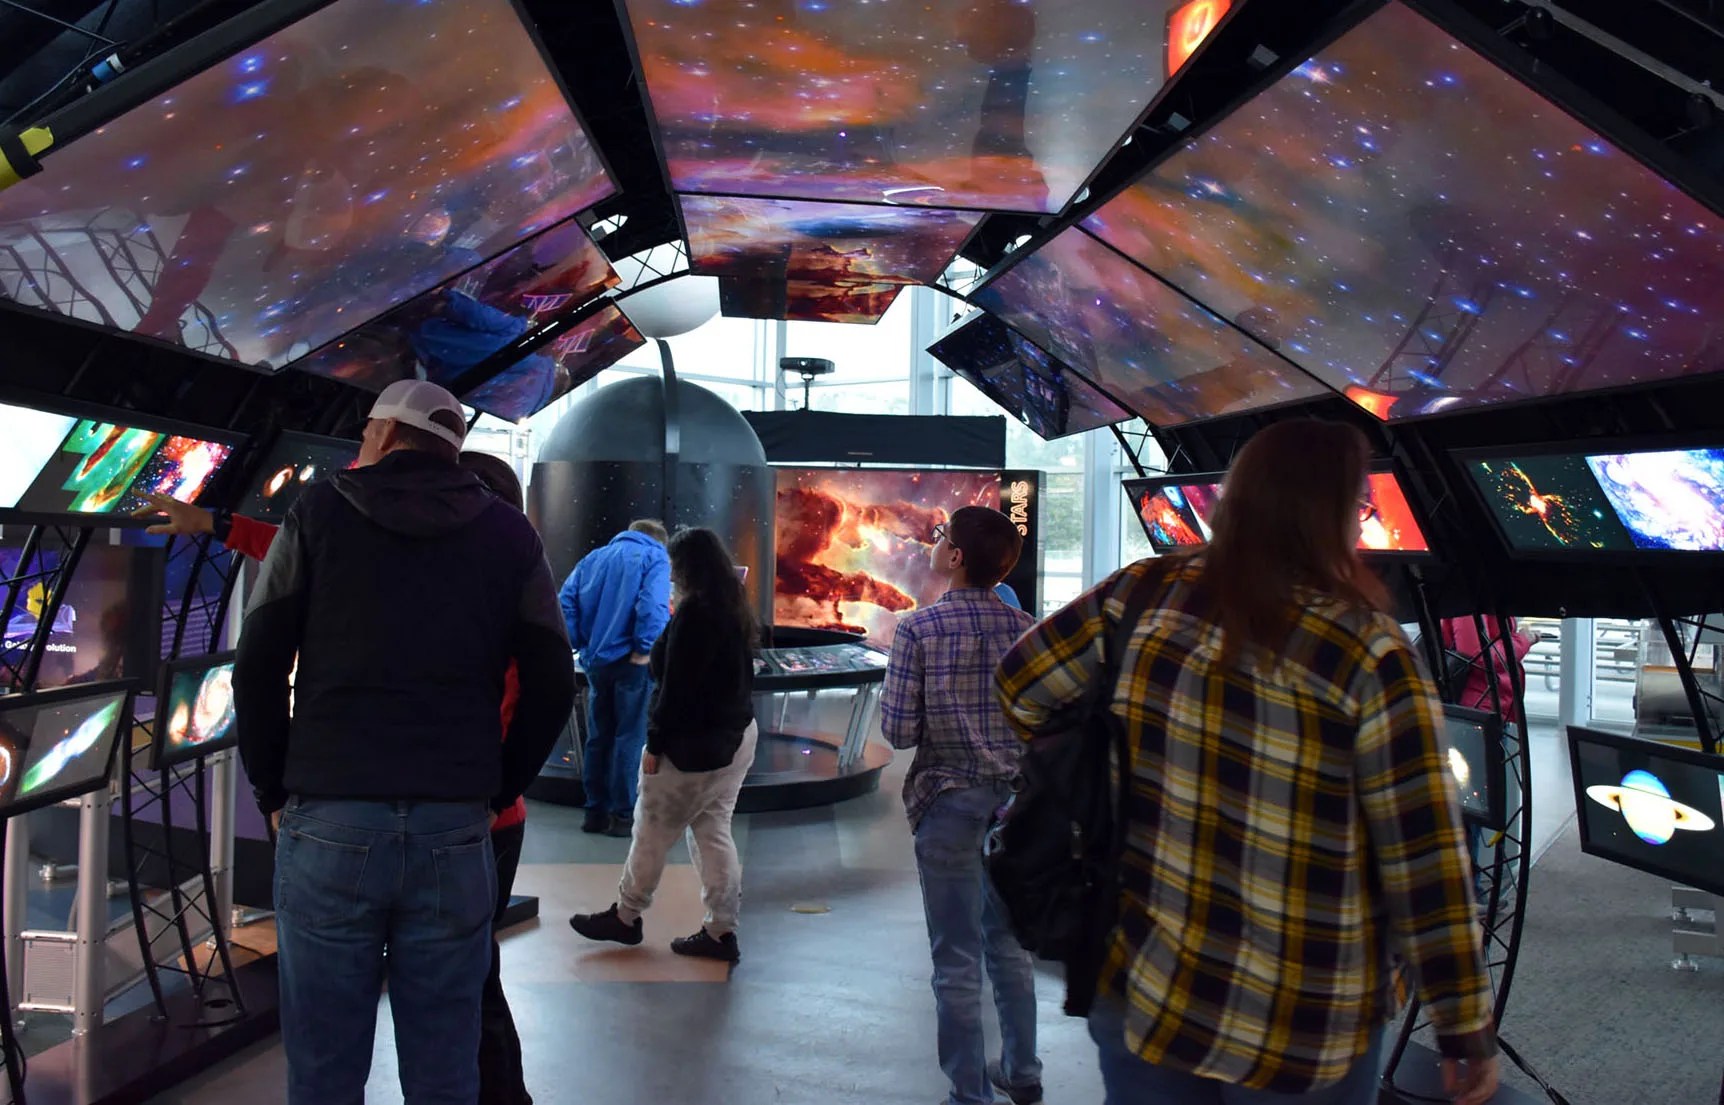 People walking through a tunnel of images at the entry way to the HST traveling exhibit.